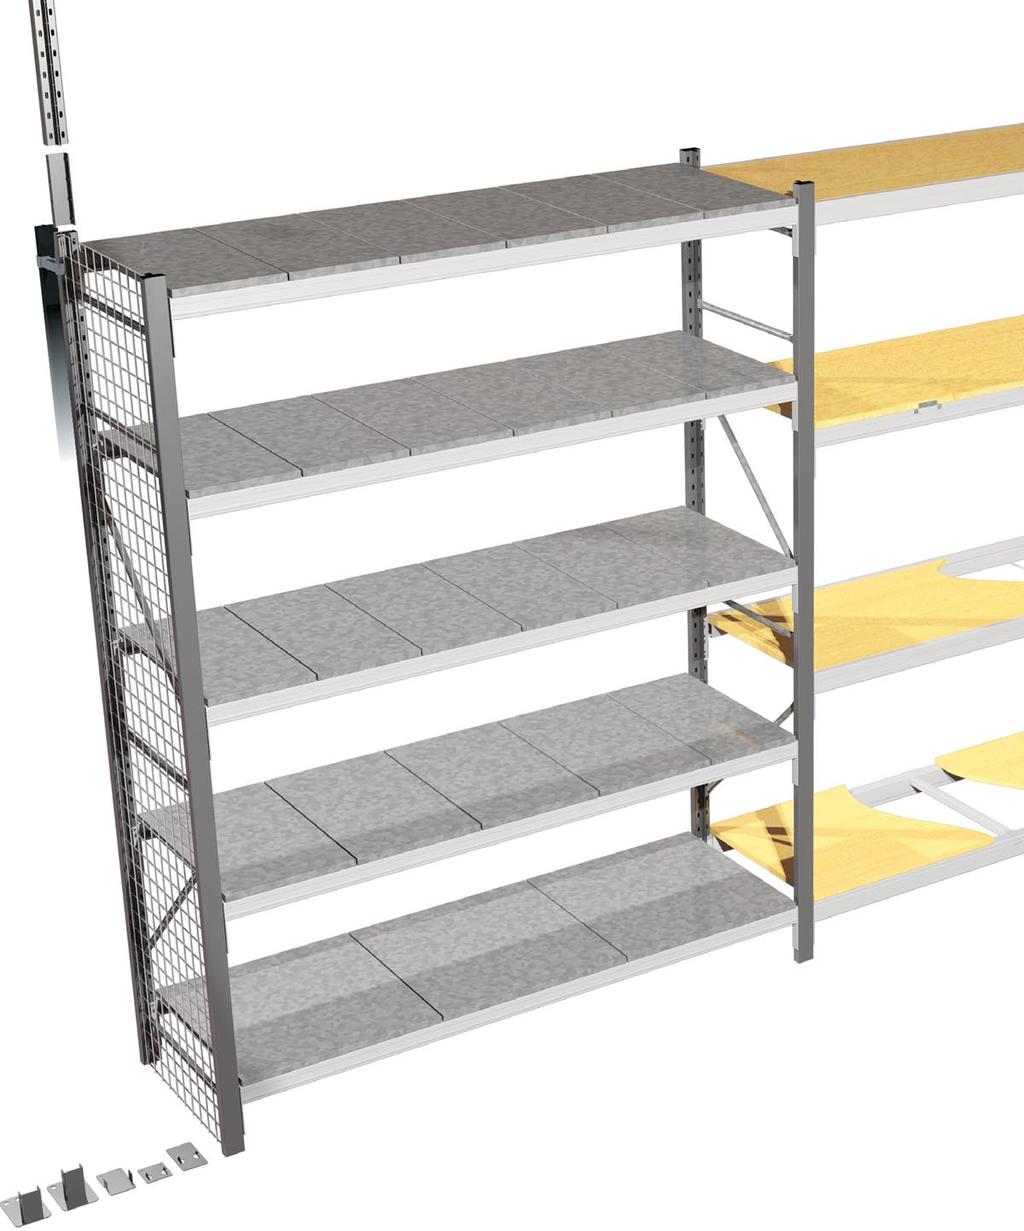 Accessories & Specification 11 1 10 6 4 7 3 page 6 9 1 Galvanised Steel Shelf Panels span across beams to form a solid steel shelf.